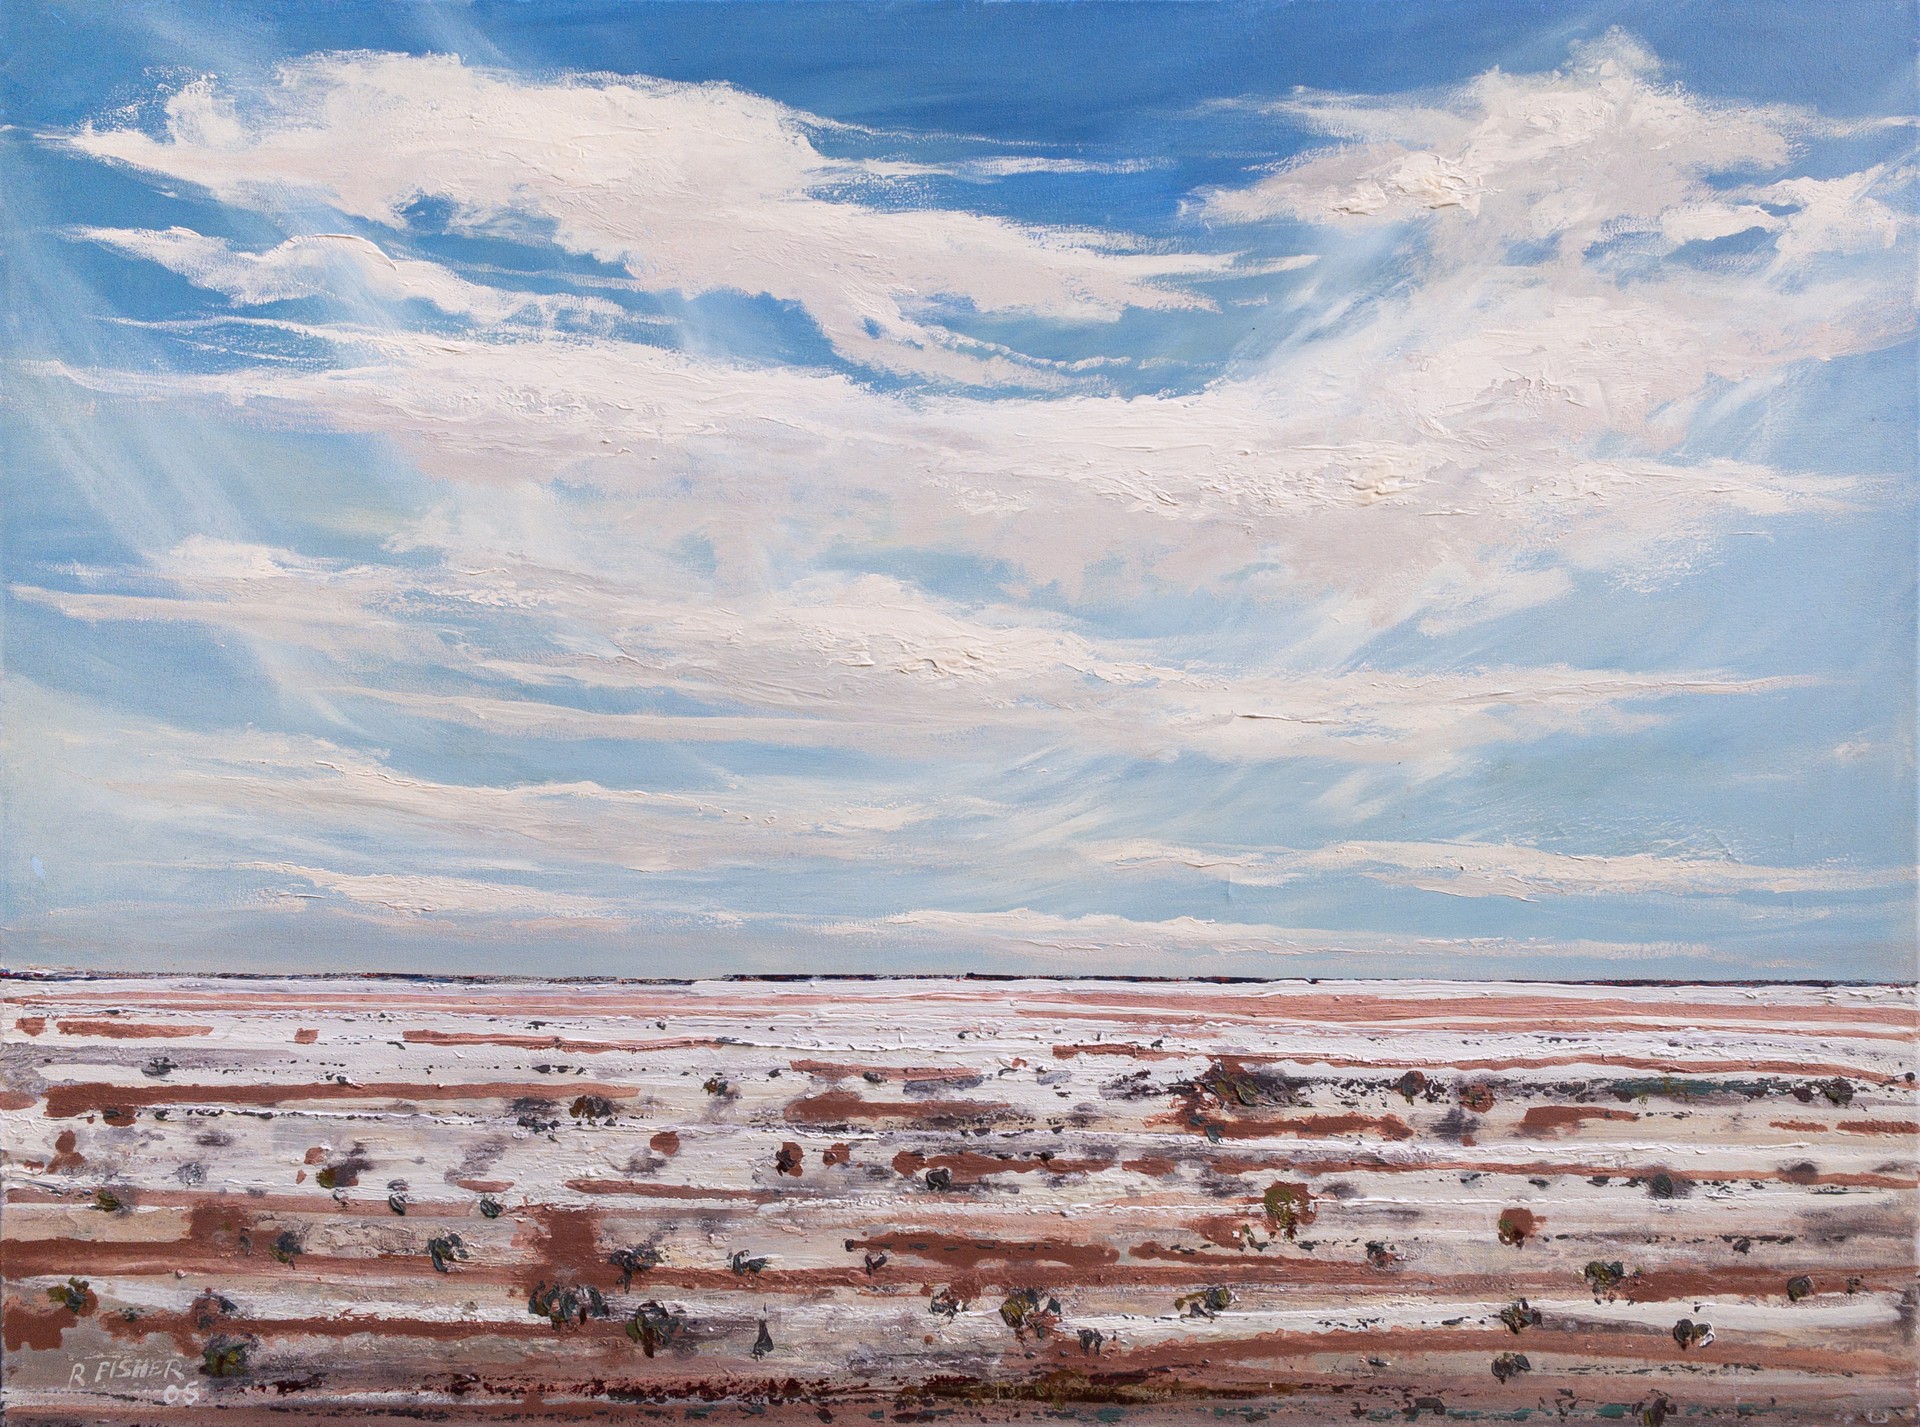 Lake Eyre - A Geologist Trek by Robert Fisher